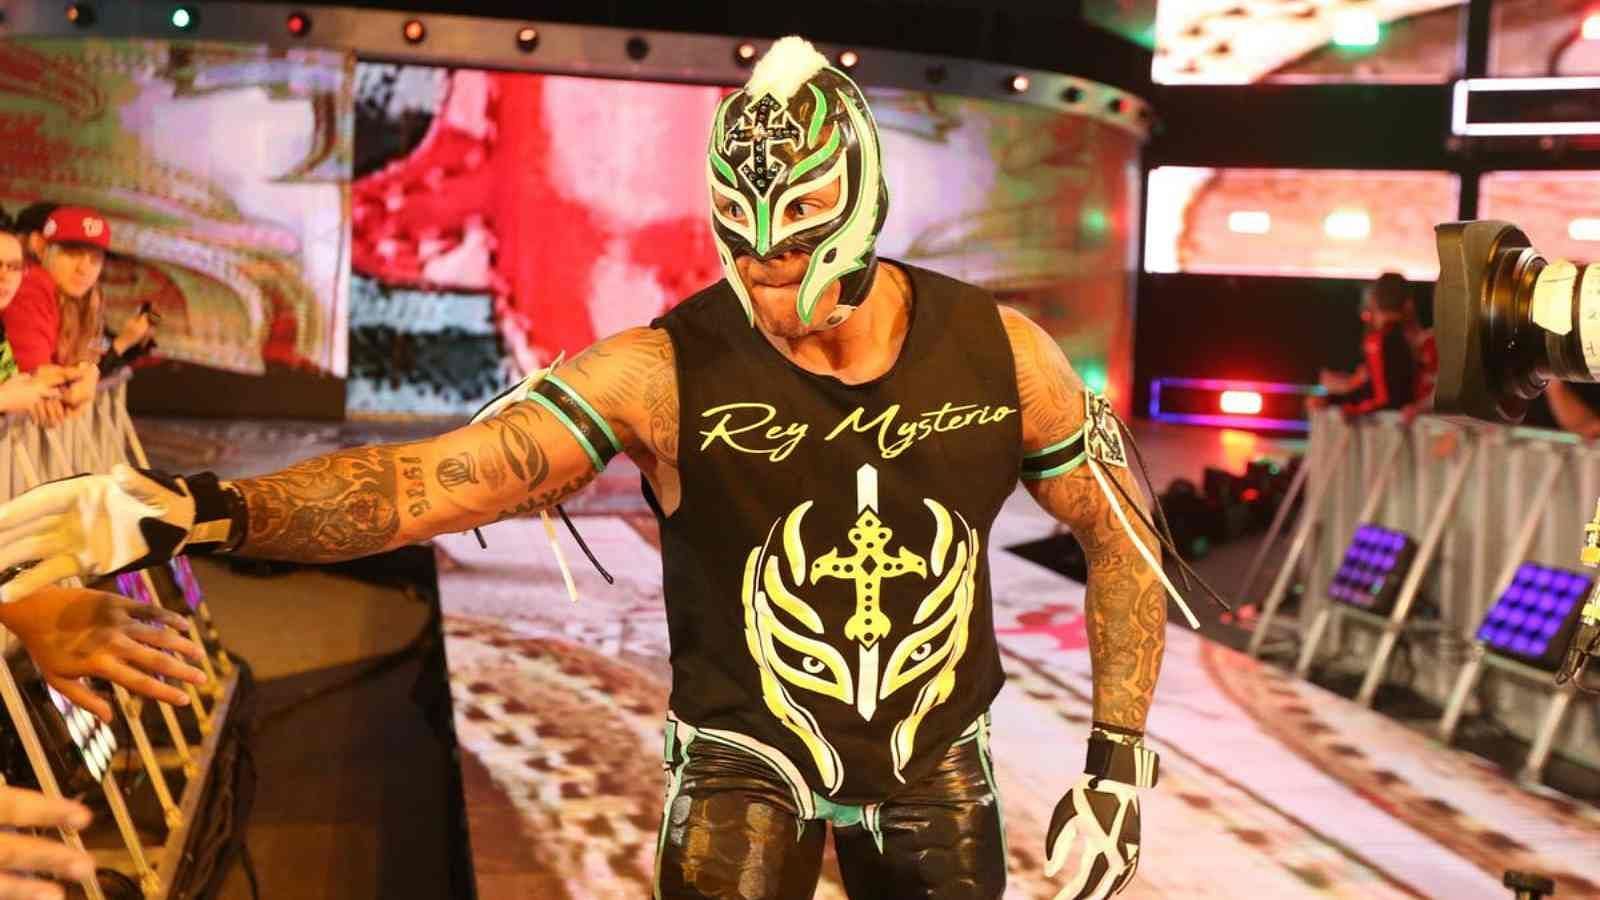 The Luchador is one of wrestling&#039;s most loved performers